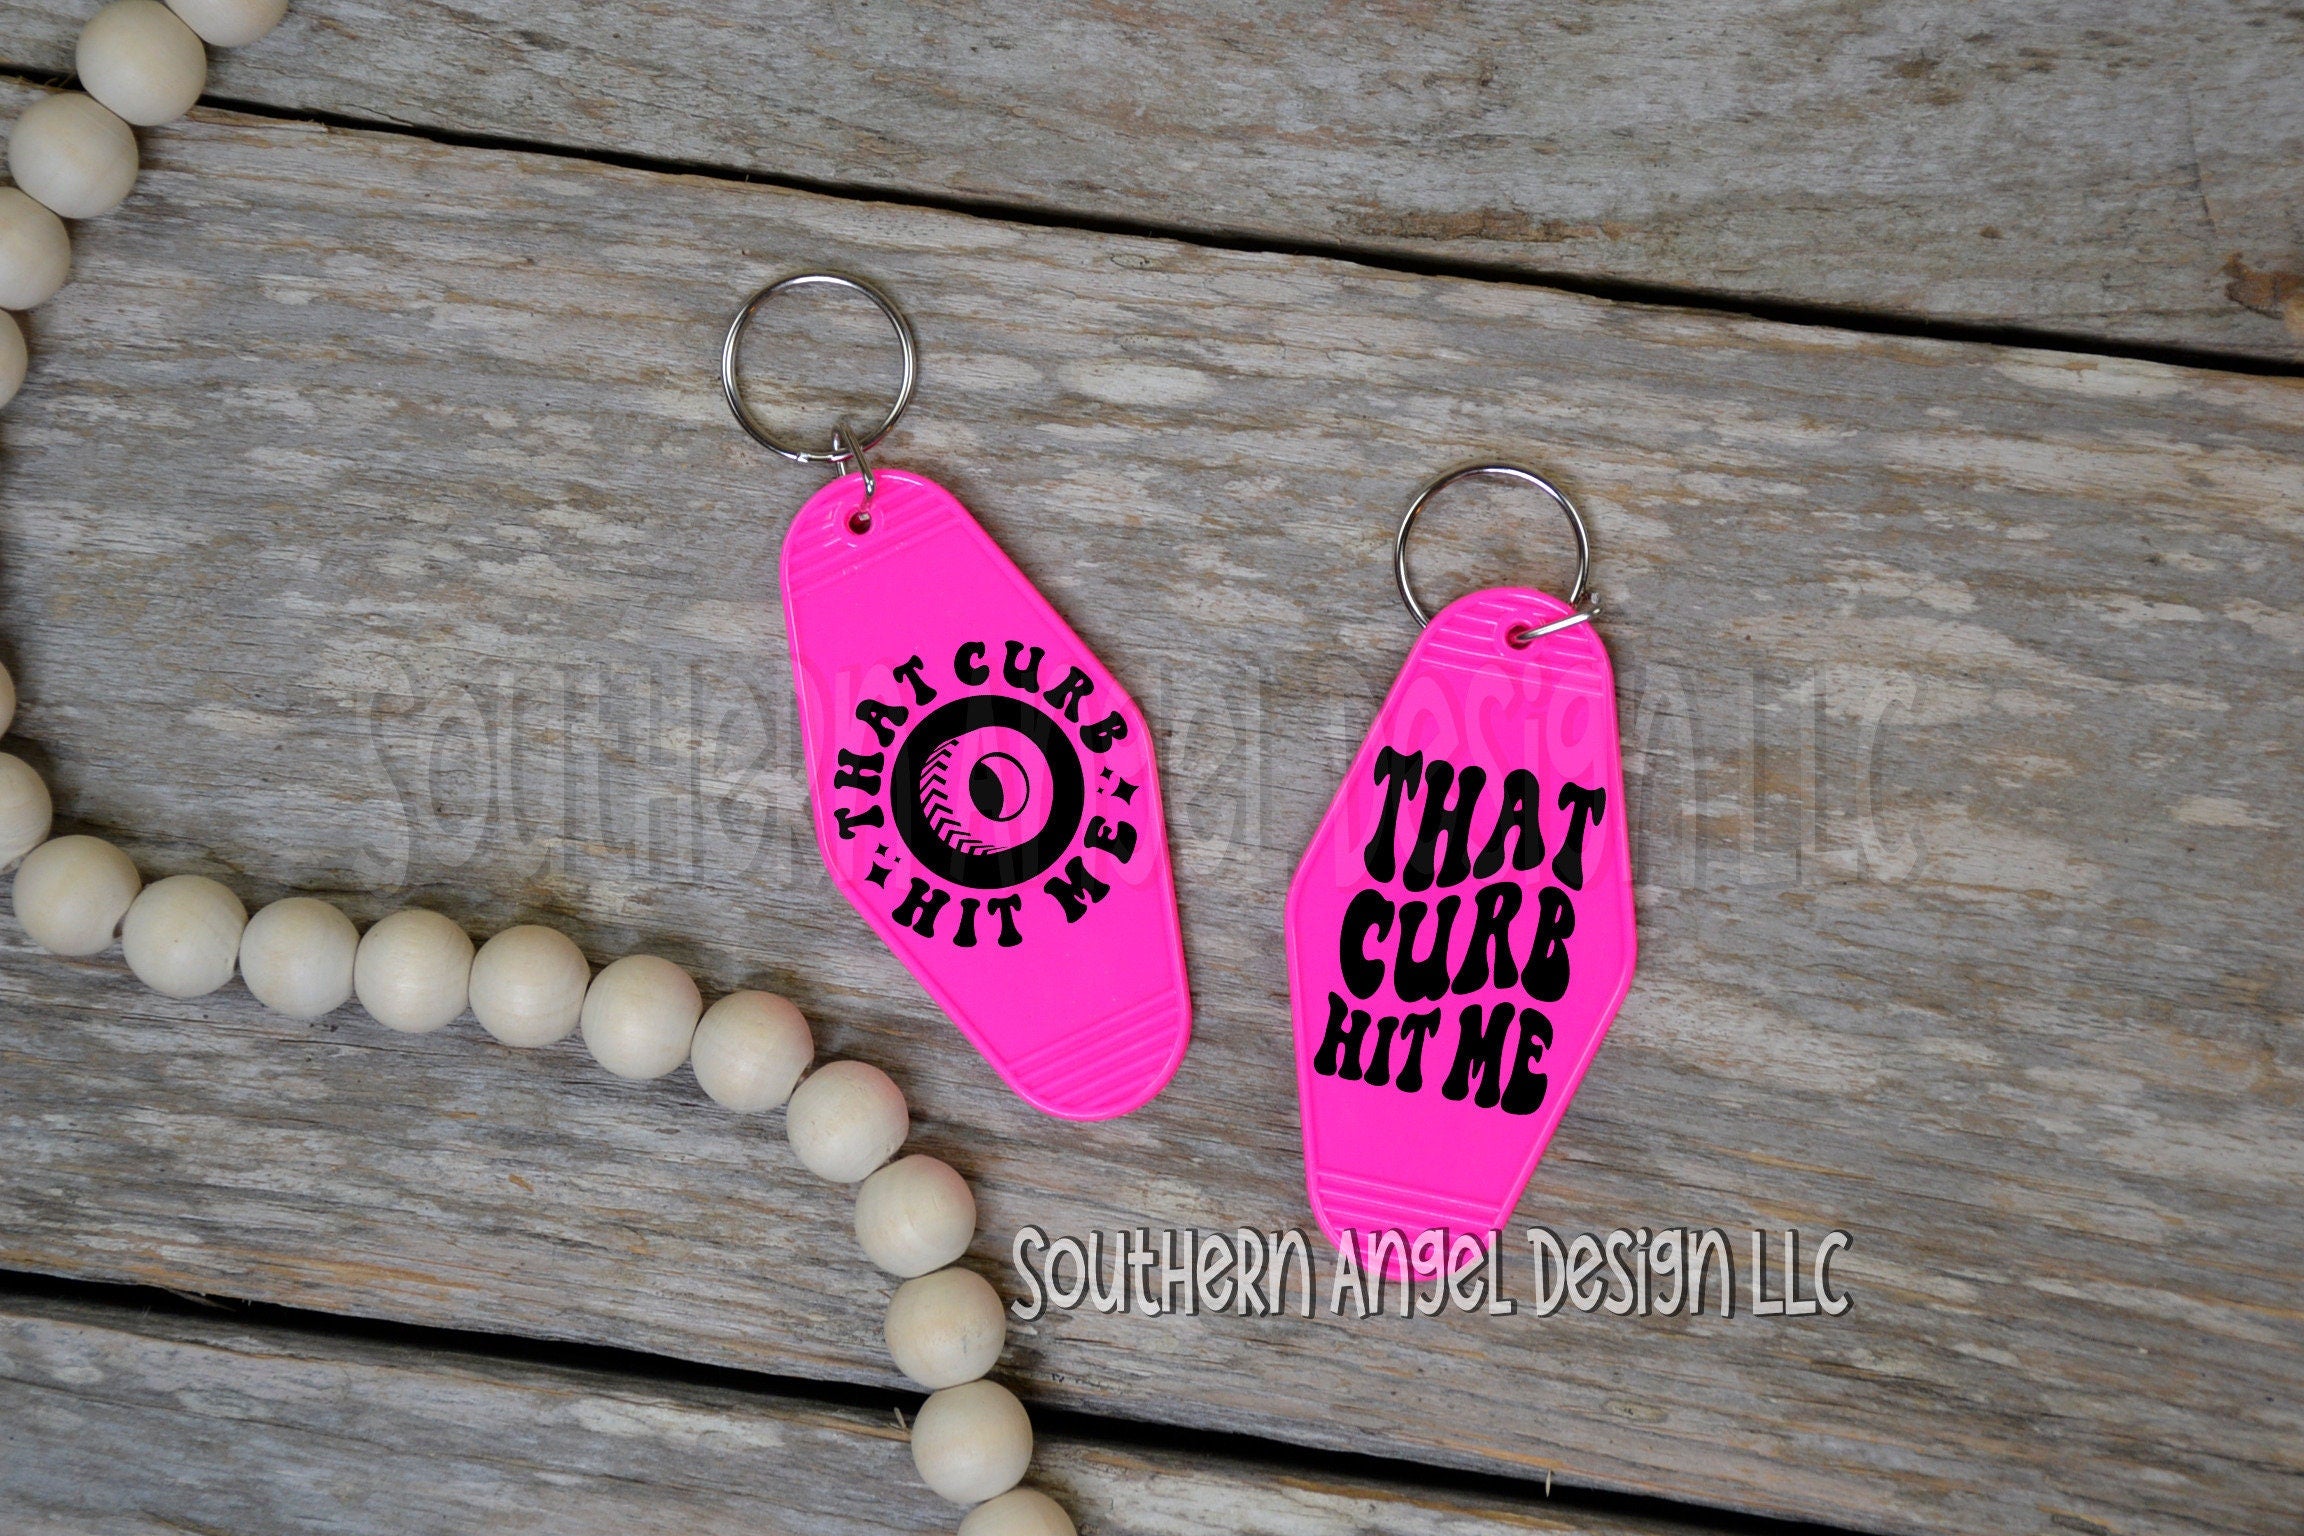 That Curb Hit Me Vintage Motel Keychain Trendy Key Tag Homemade Funny Gifts for Her Pink Car Accessories